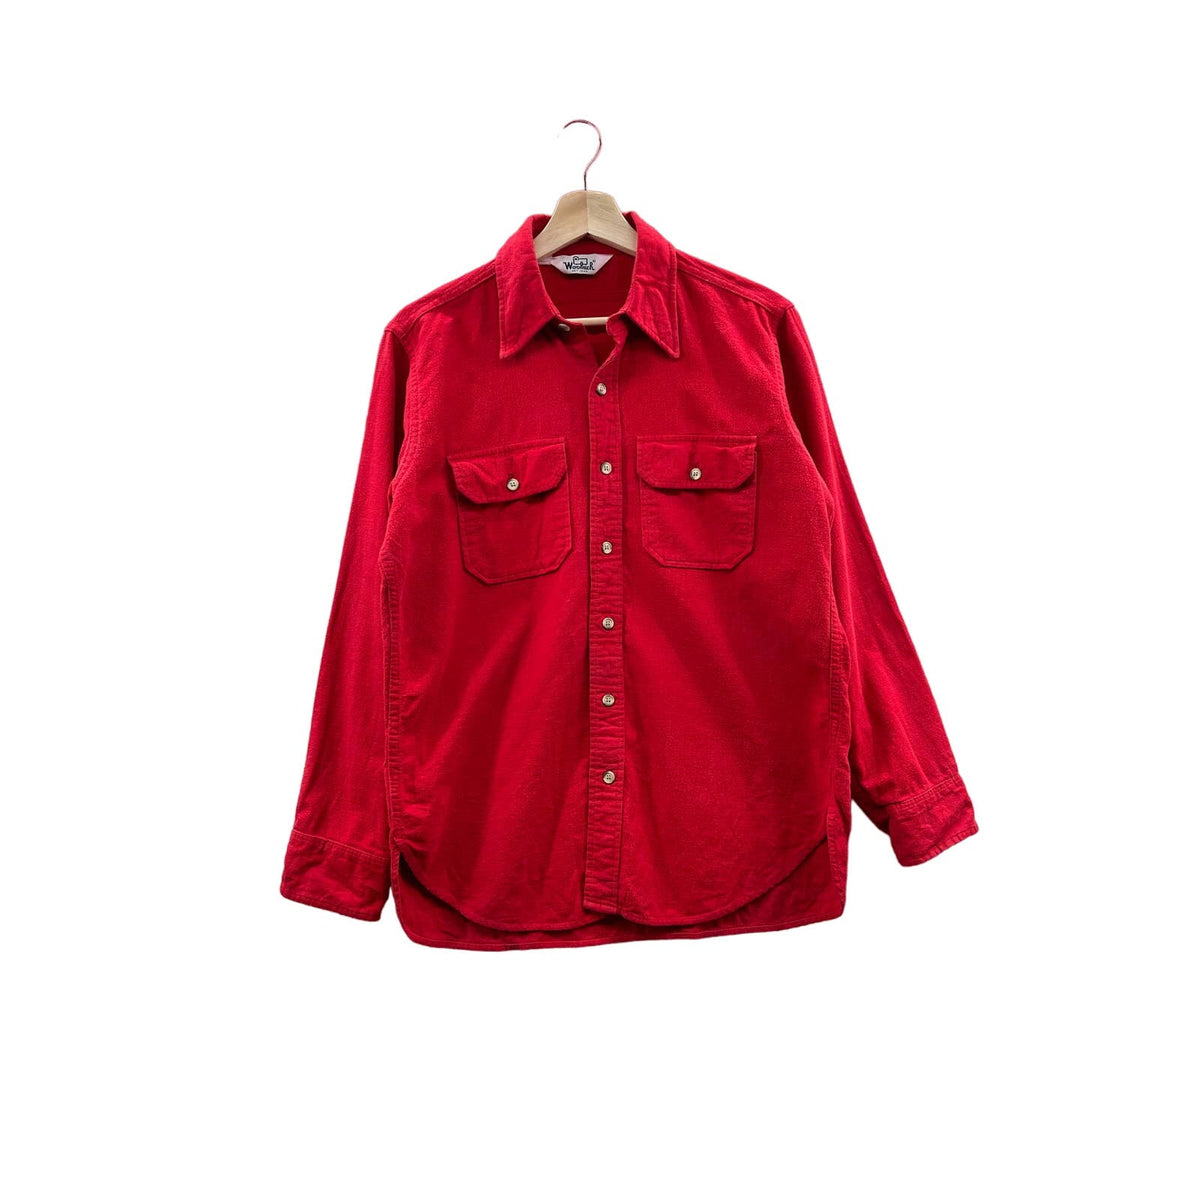 Vintage 1990's Woolrich Men's Red Chamois Button Up L/S Shirt